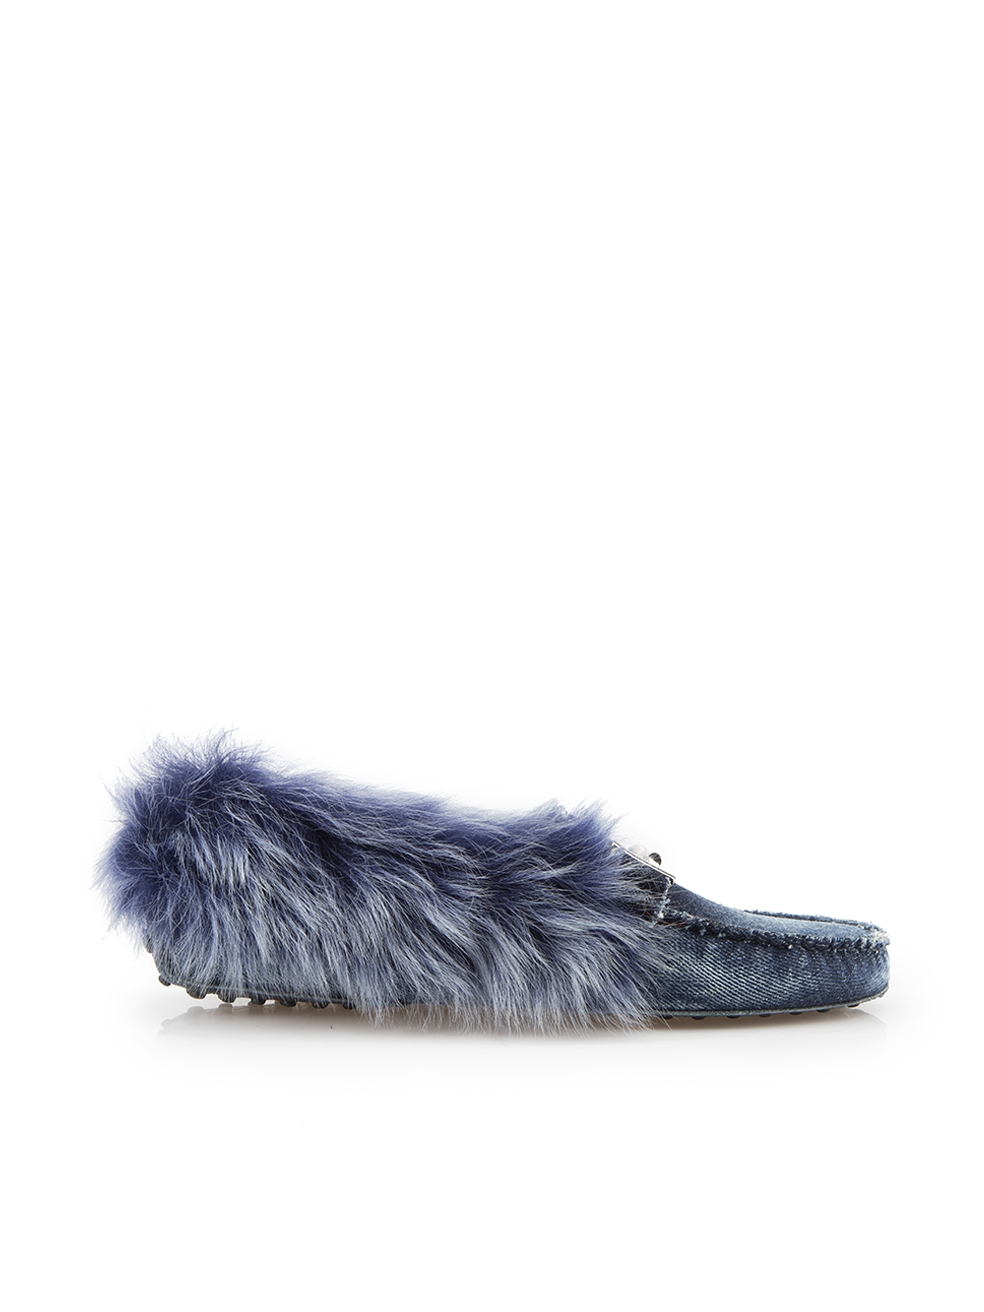 Tod's Blue Denim Lined Loafers | CSD